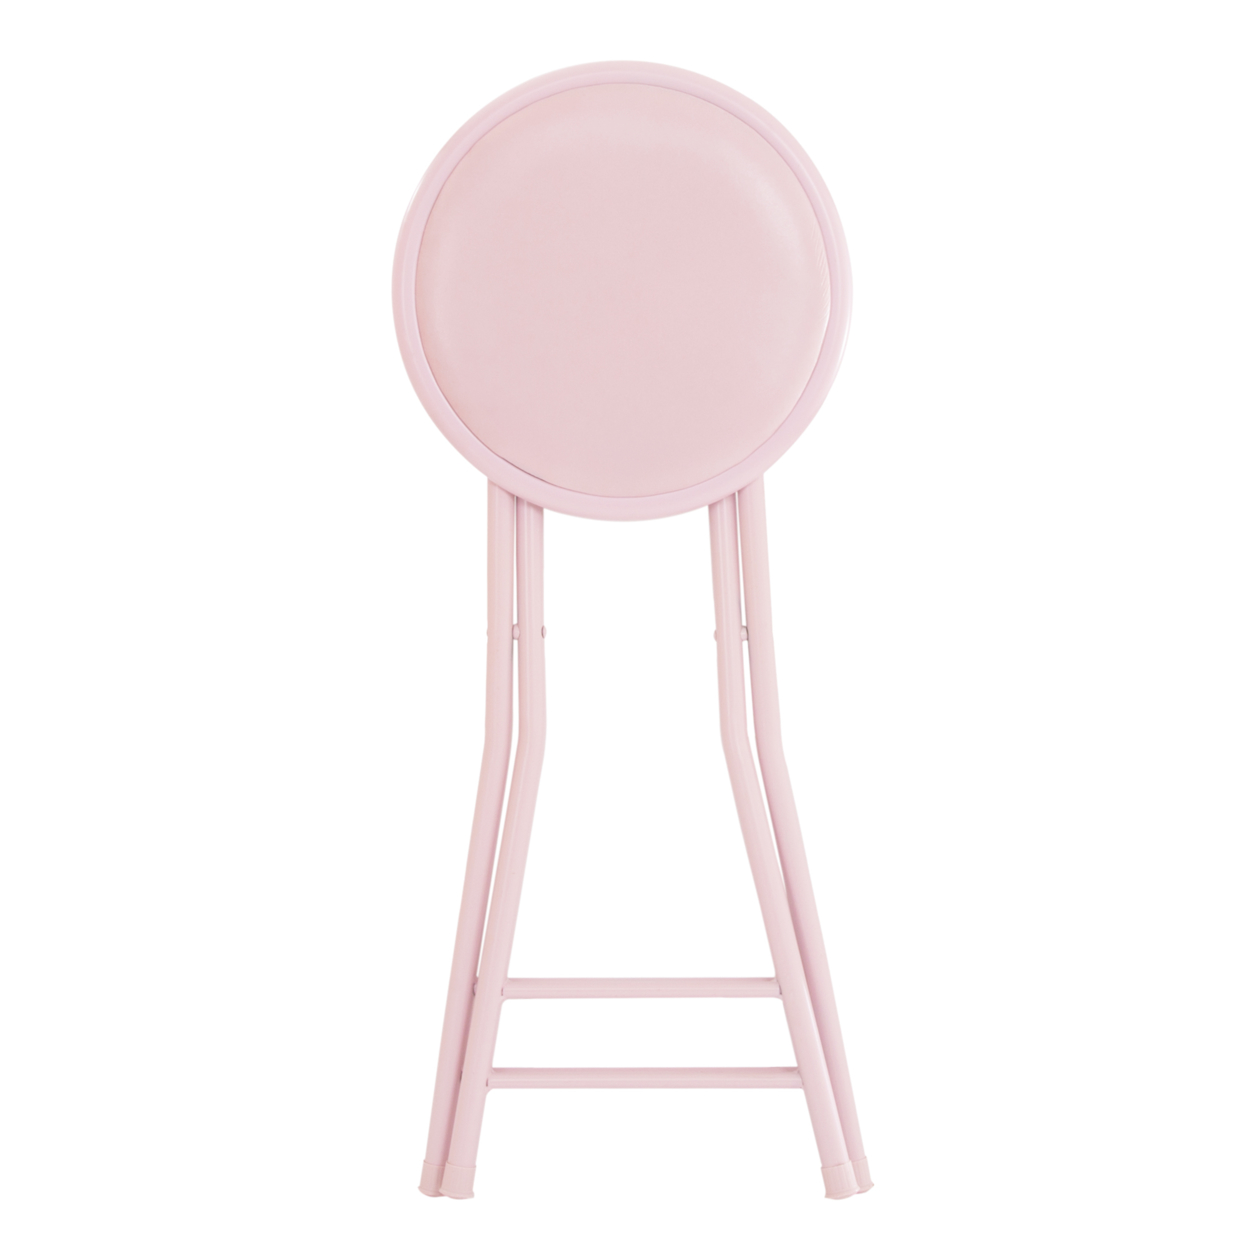 Pink Folding Stool – Heavy Duty 24-Inch Collapsible Padded Round Stool With 300 Pound Limit